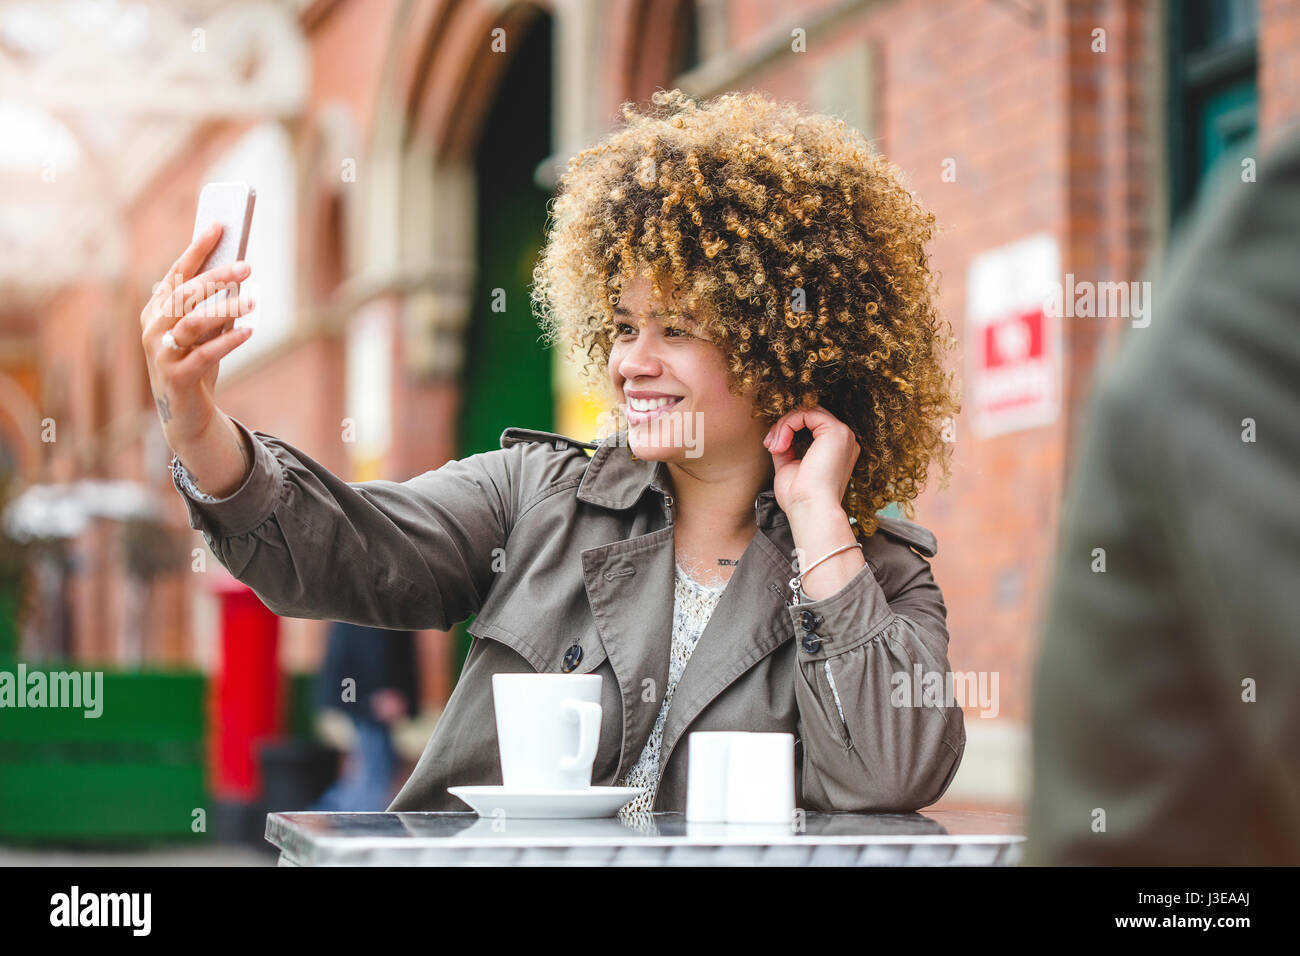 Woman taking a selfie on a smartphone. She is sat outside a cafe and is using a smart phone to take a photo. Stock Photo